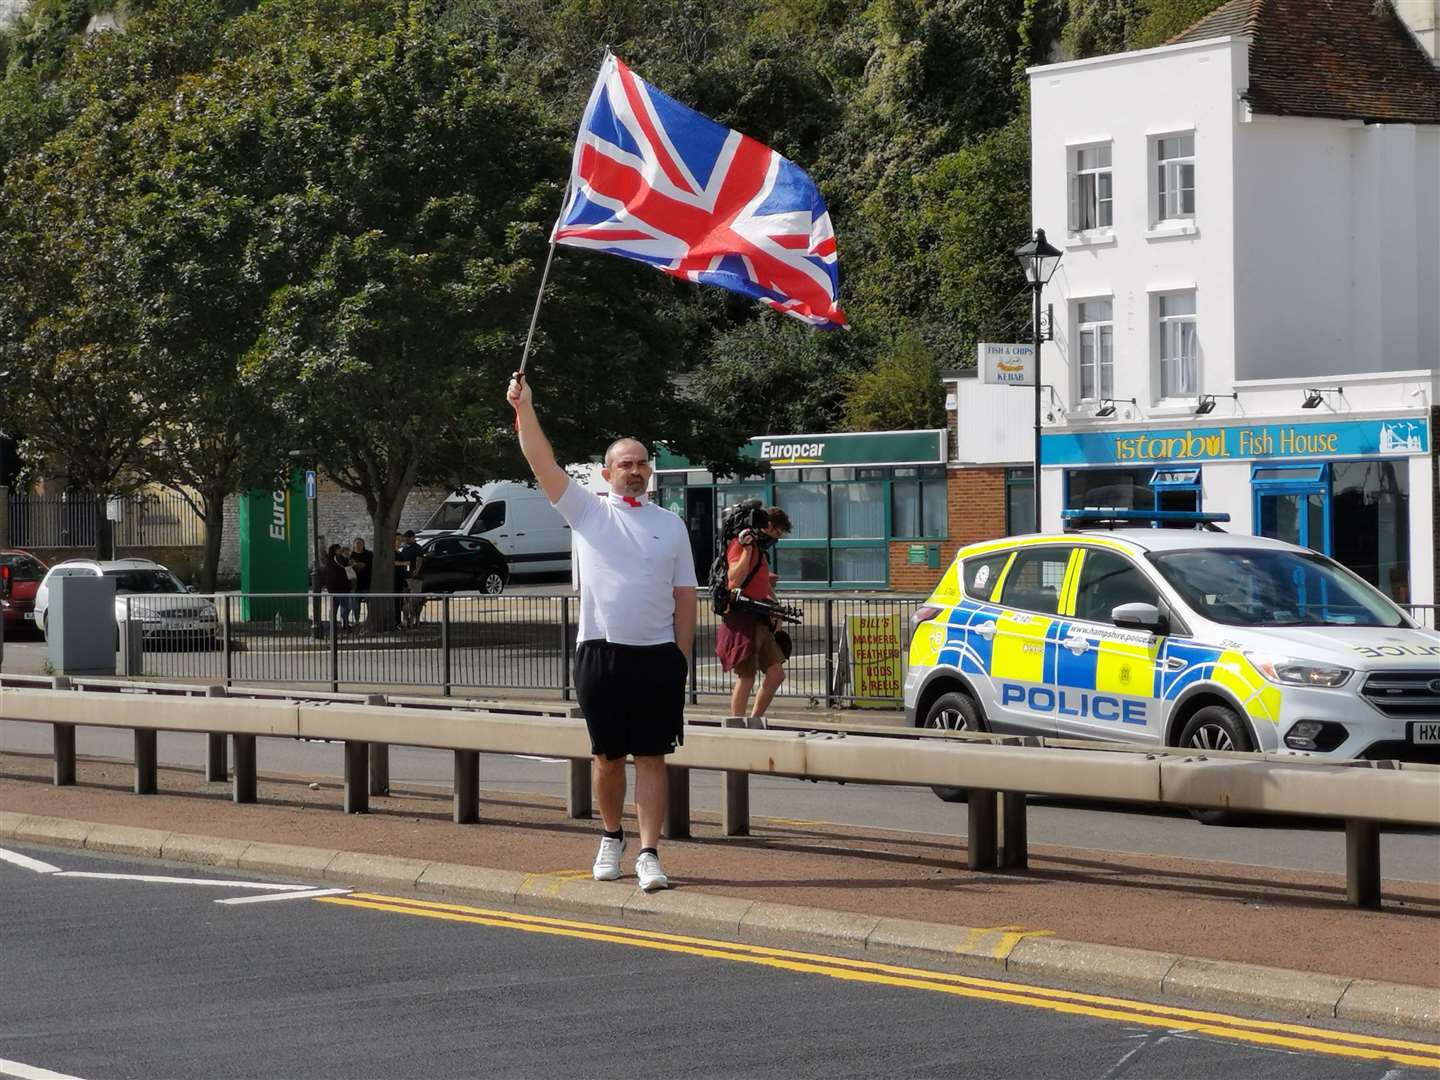 A man waves his flag. Picture: Oliver Kemp